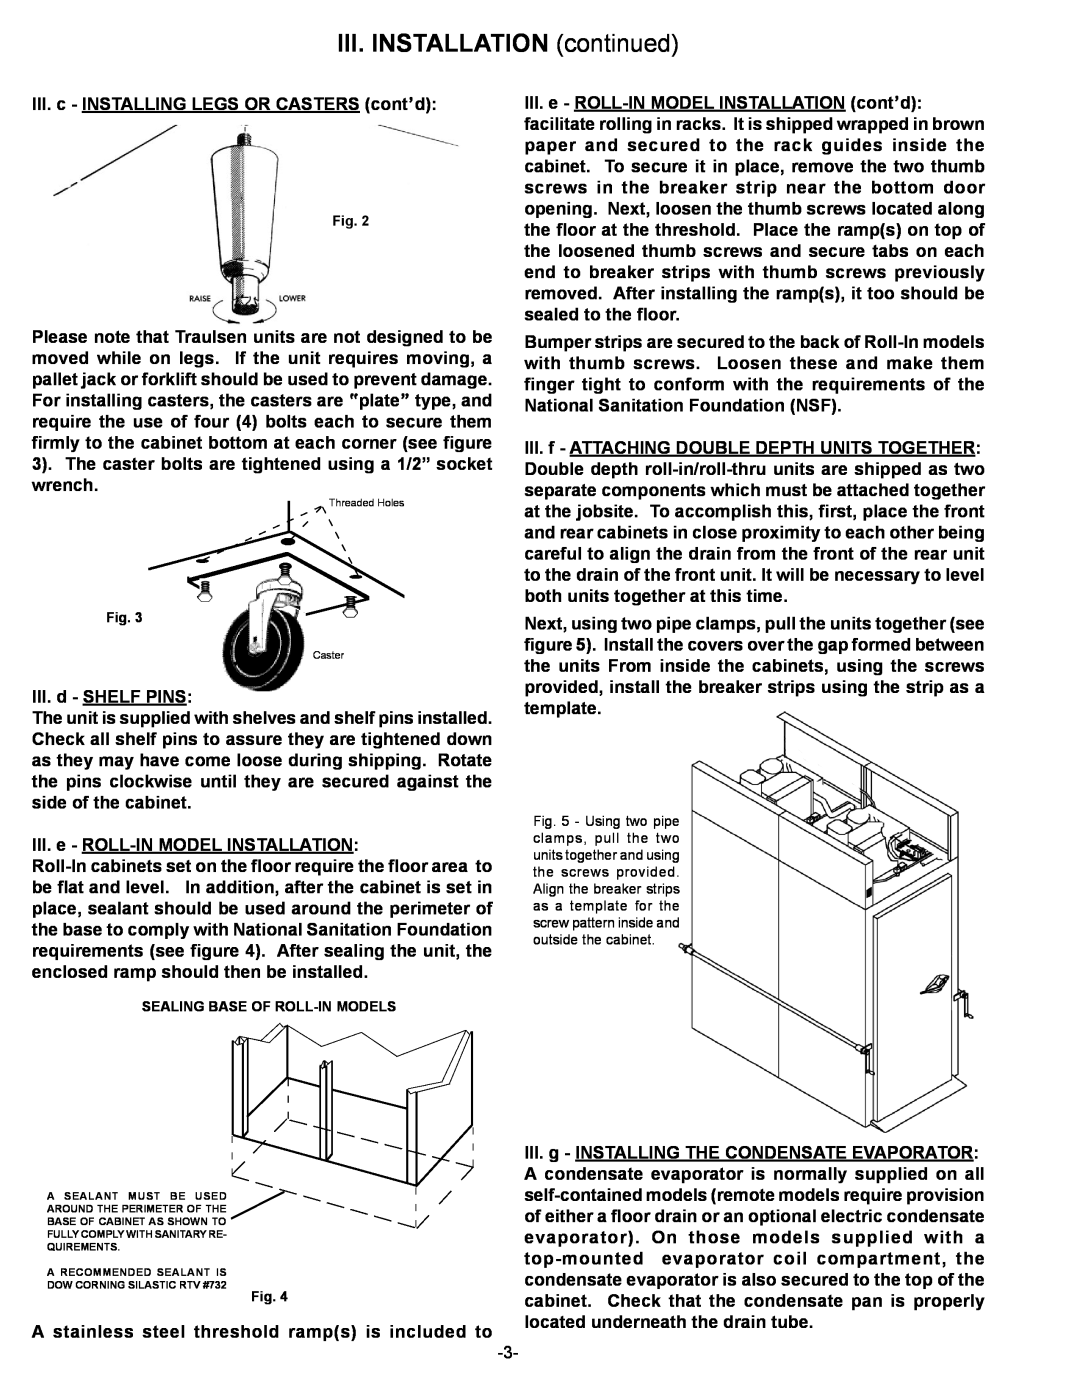 Traulsen R & A Series owner manual III. INSTALLATION continued, III. c - INSTALLING LEGS OR CASTERS cont’d 